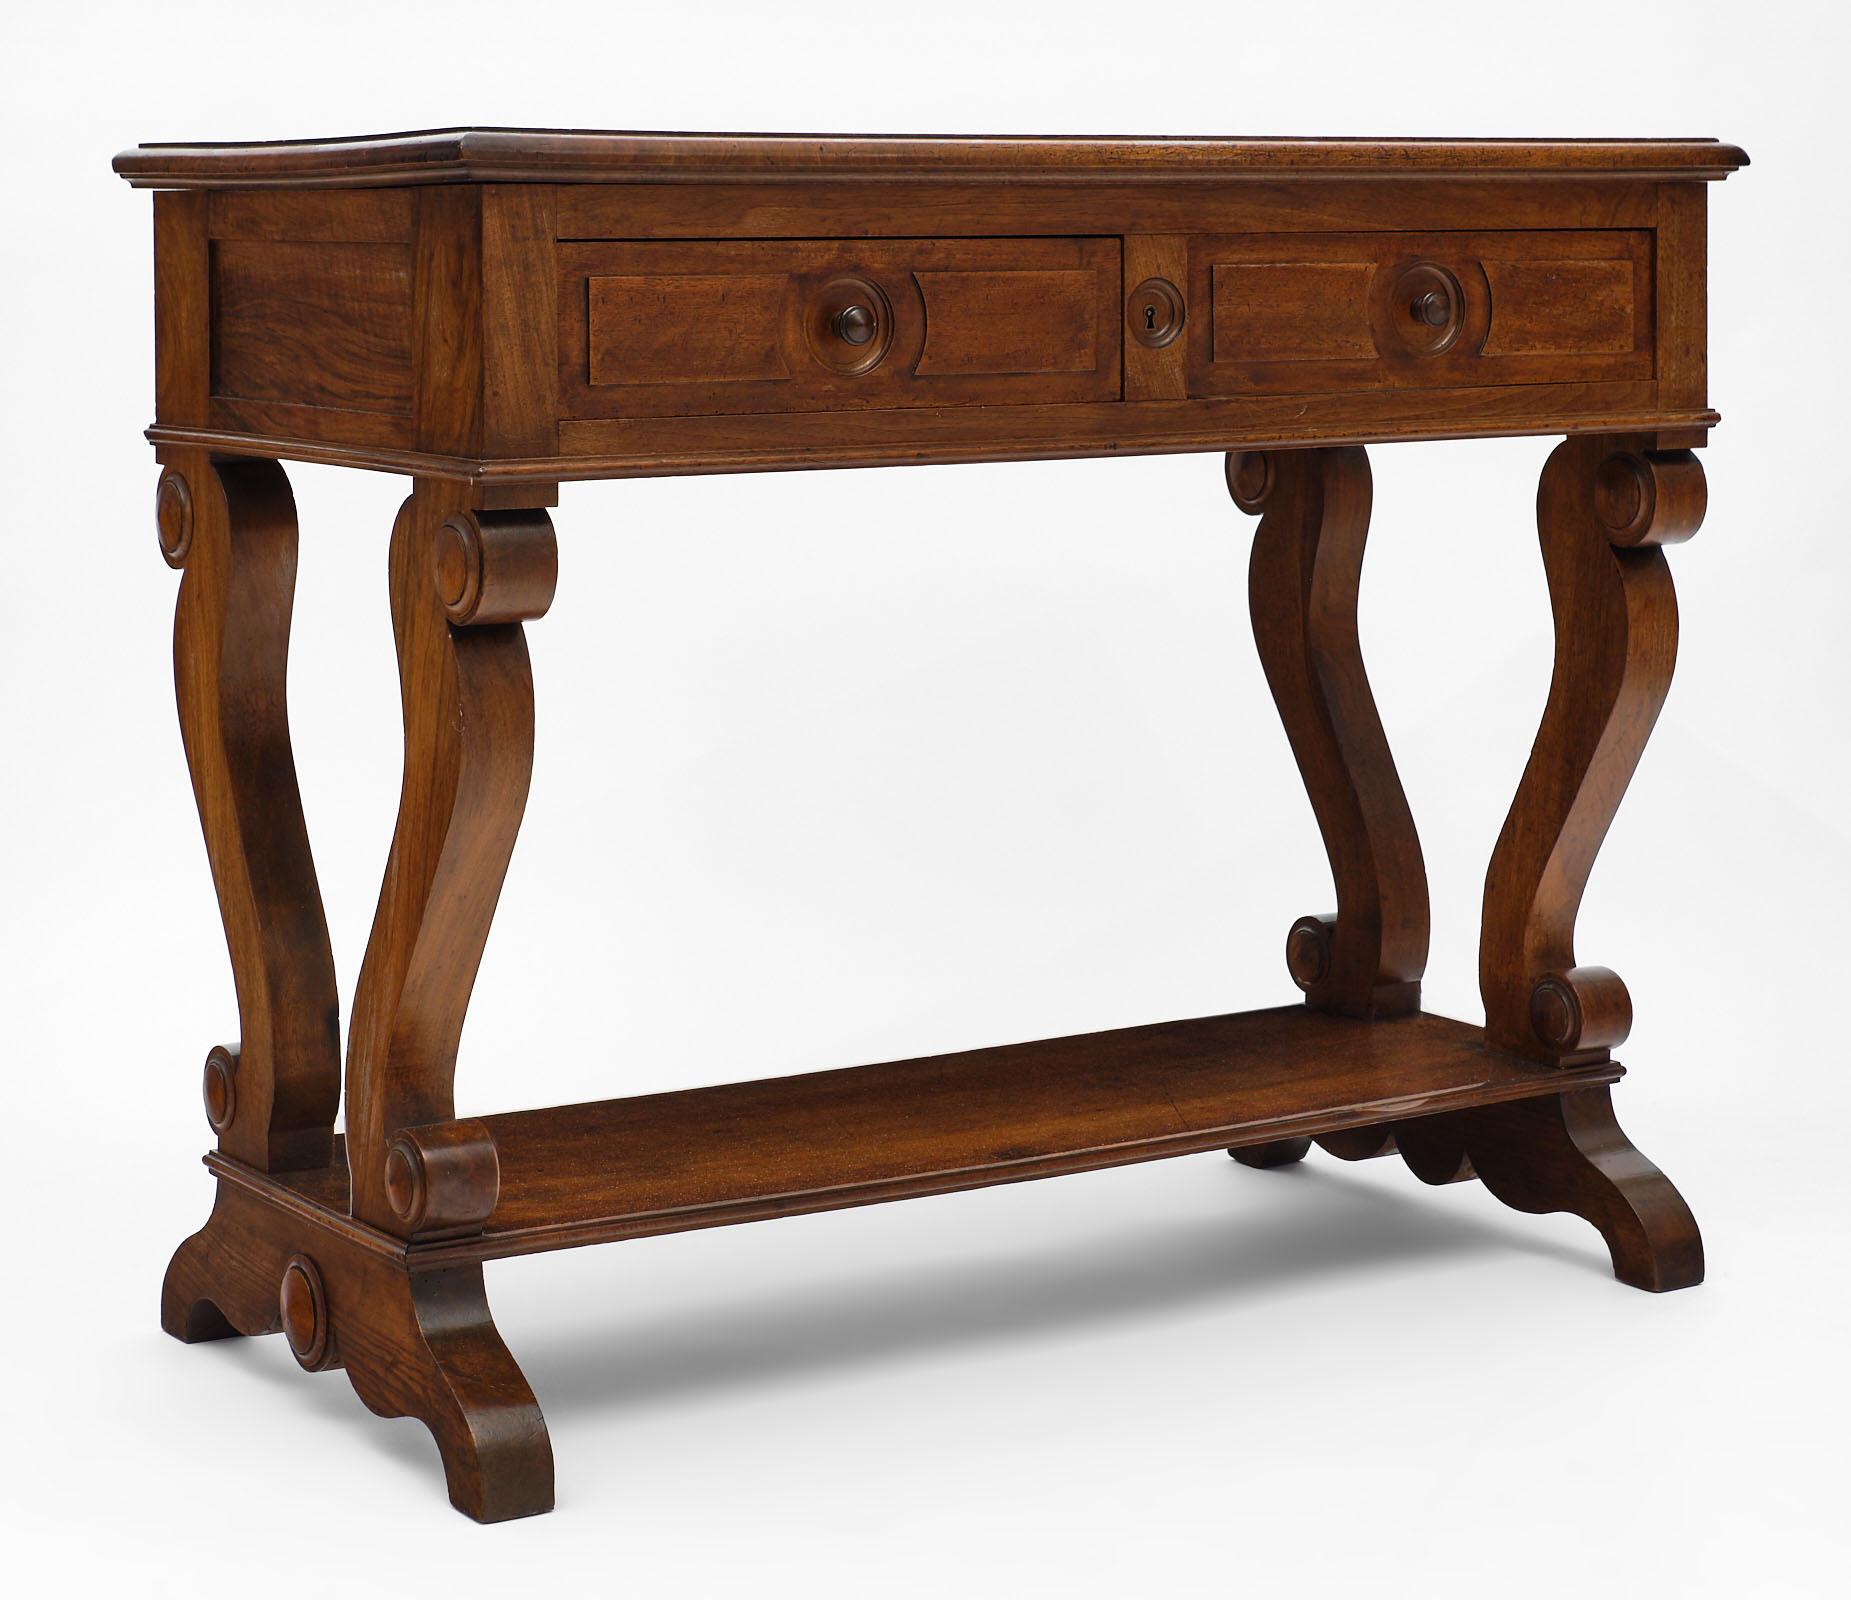 A fine Restoration period French console made of solid walnut and featuring two dovetailed drawers and a bottom shelf. The four console legs are hand carved and support the top, the feet under the shelf are hand carved as well. The piece comes from